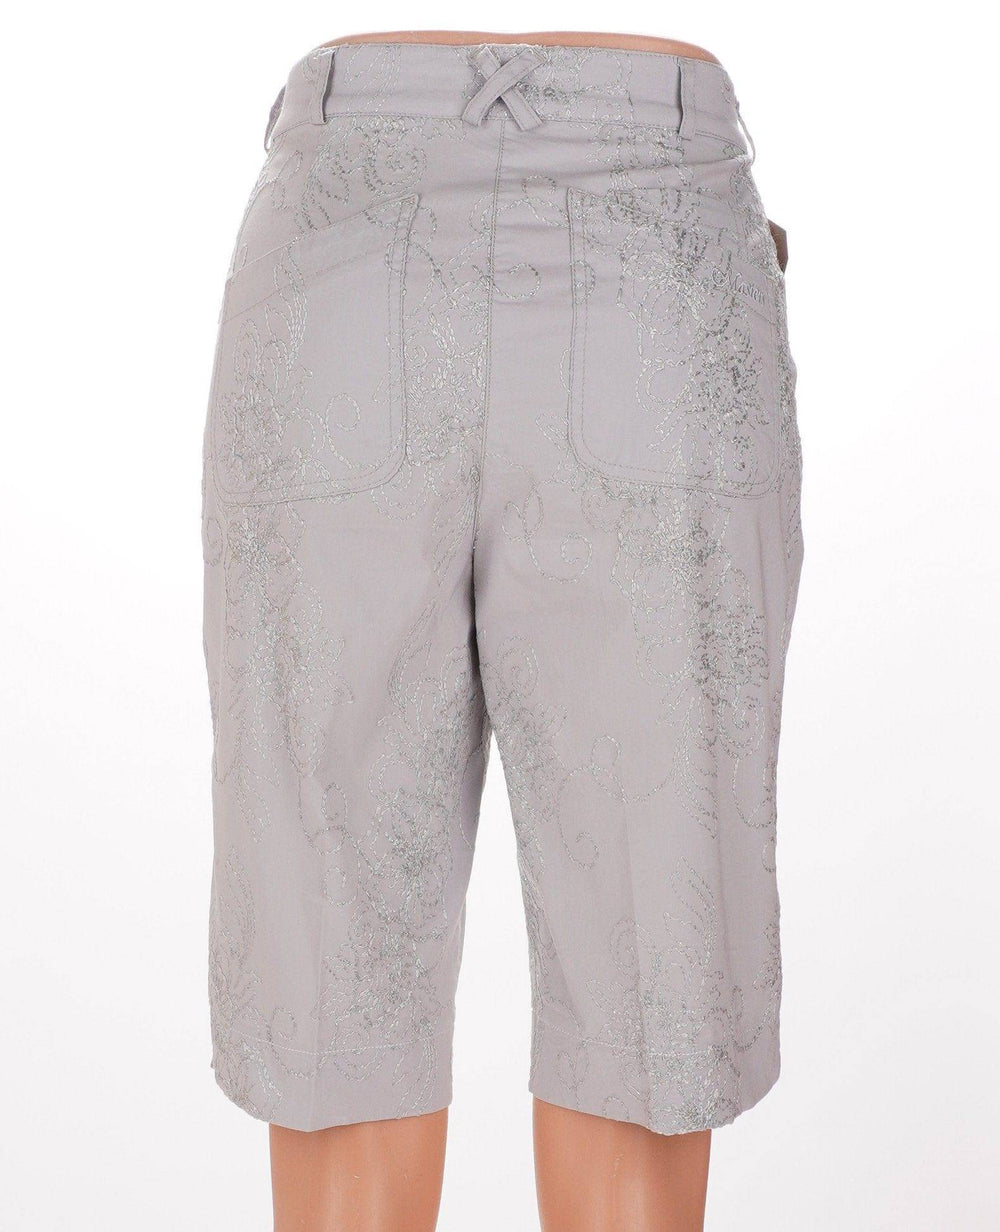 Masters Grey / Consigned / 8 Masters Floral Bermuda Shorts- Grey - Size 8